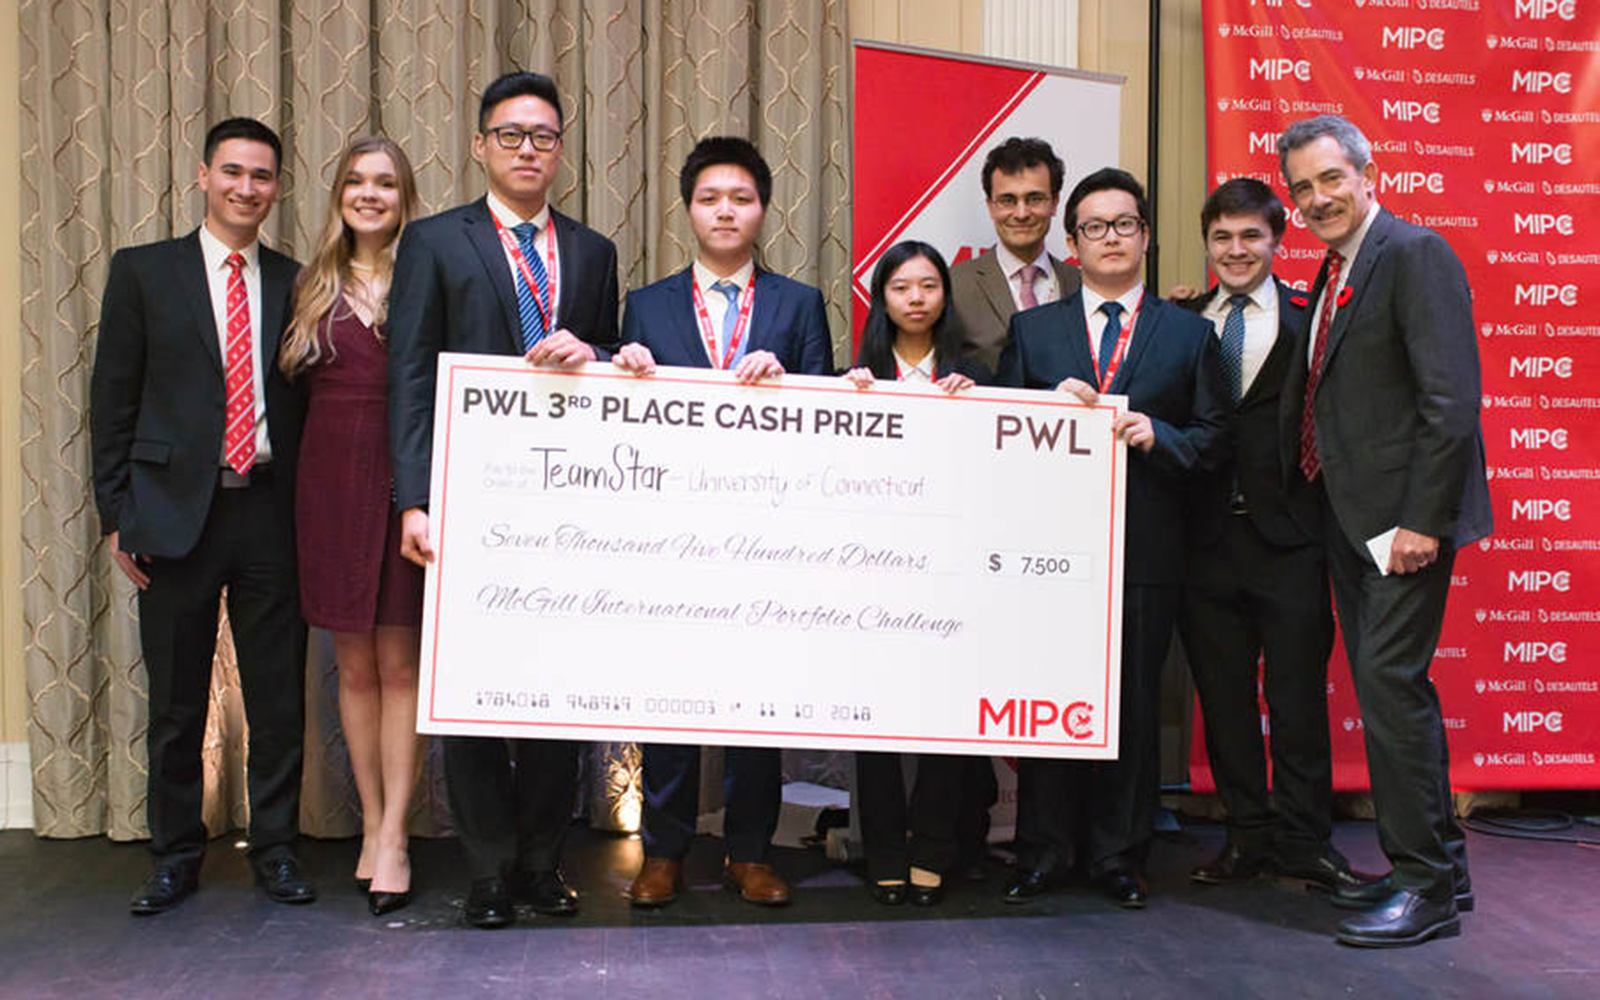 UConn students, from left, Junchao Liao, Xiofan Hou, Xiao Wang and Tuershunjiang Ahemaitijiang hold their check after being recognized as the top U.S. team at the McGill International Portfolio Challenge in Montreal earlier this month. They are surrounded by event organizers. (Photo Courtesy of Jose Aponte)